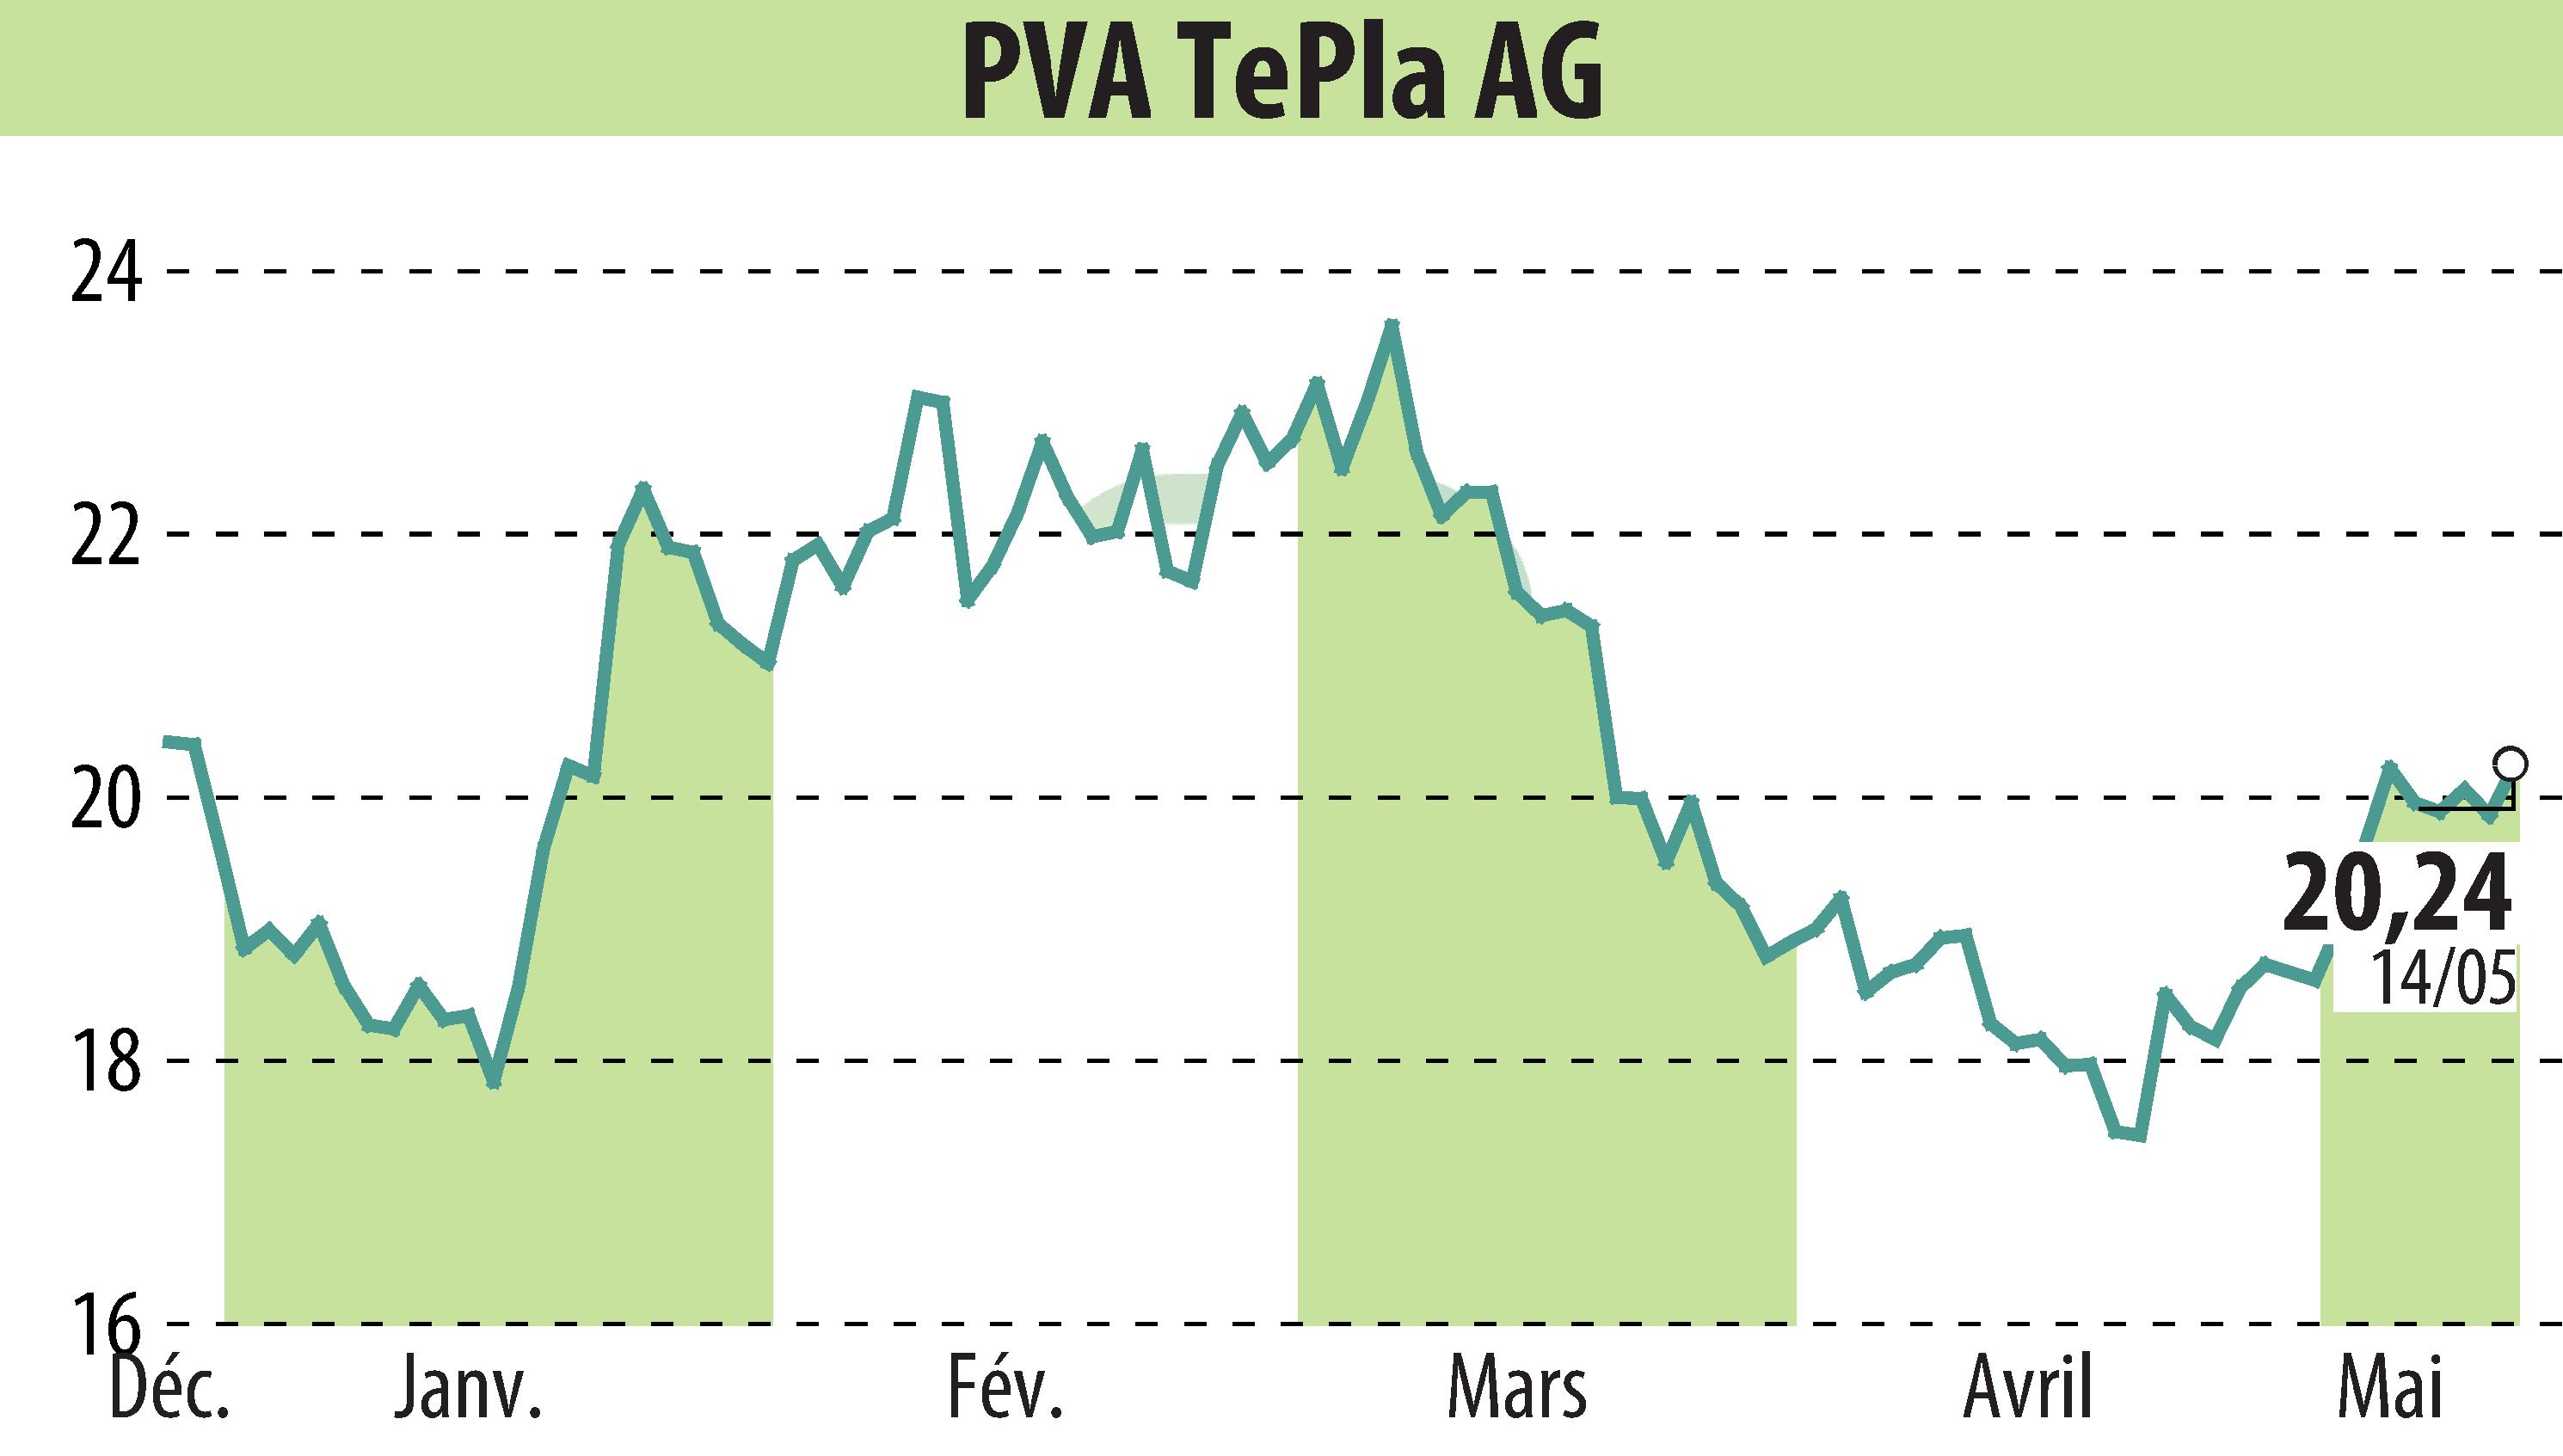 Stock price chart of PVA TePla AG (EBR:TPE) showing fluctuations.